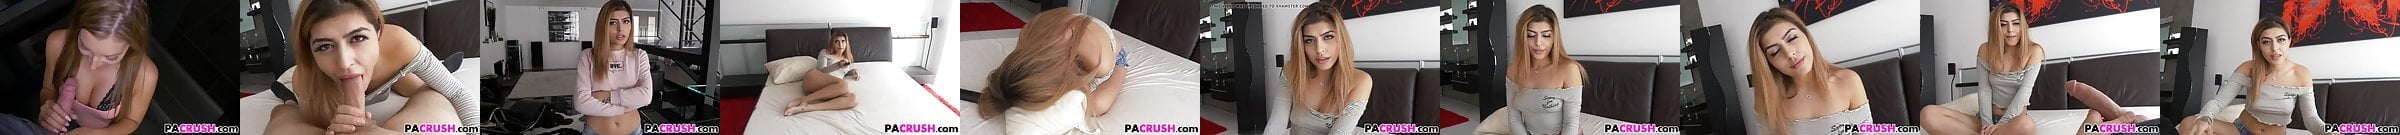 Featured Dad Crush Porn Videos 6 Xhamster